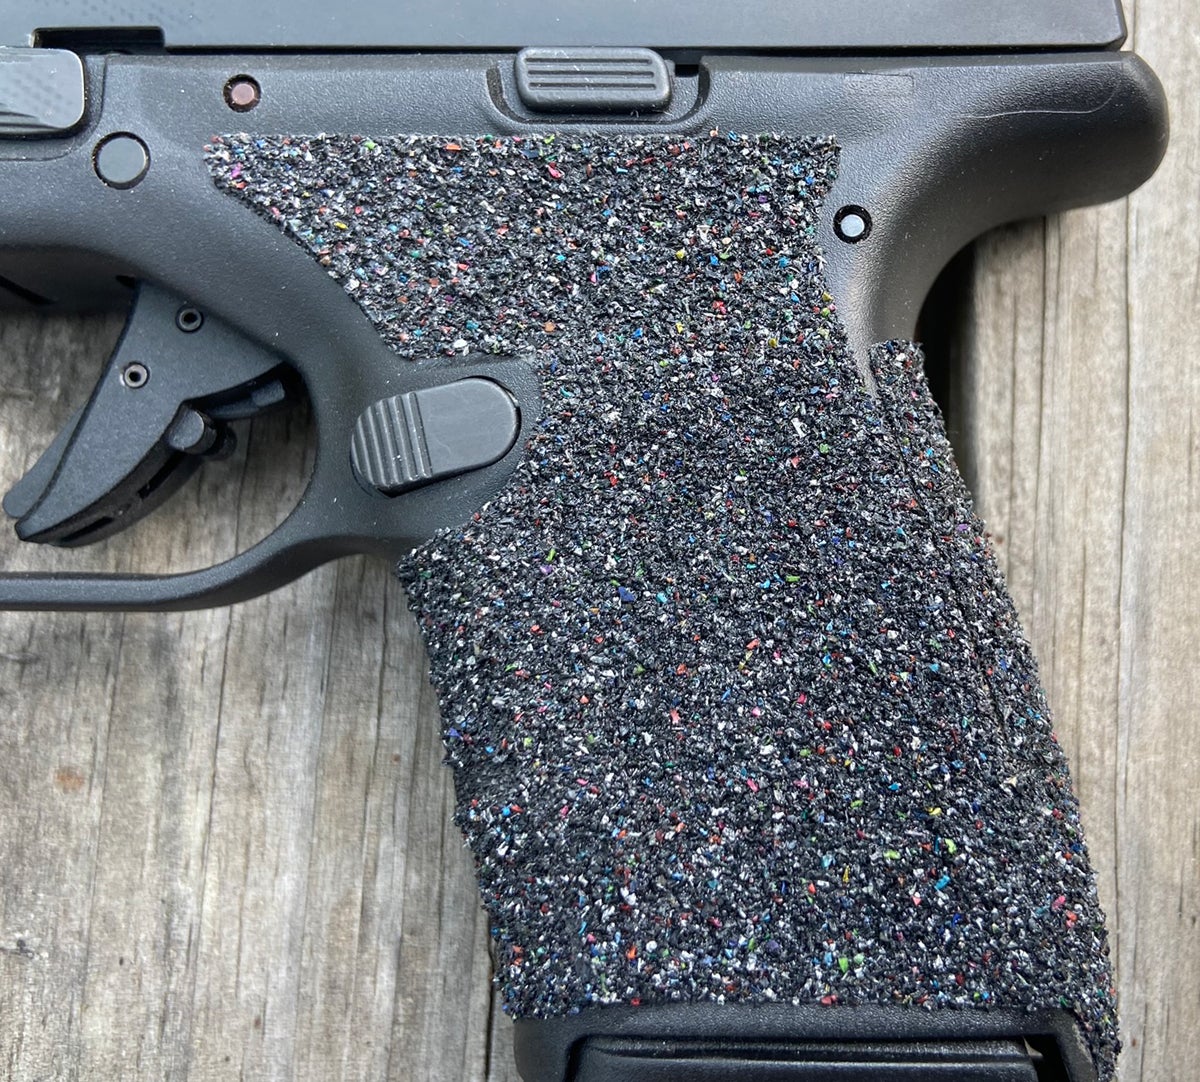 Talon Grips’ New Pro Grip Now Available